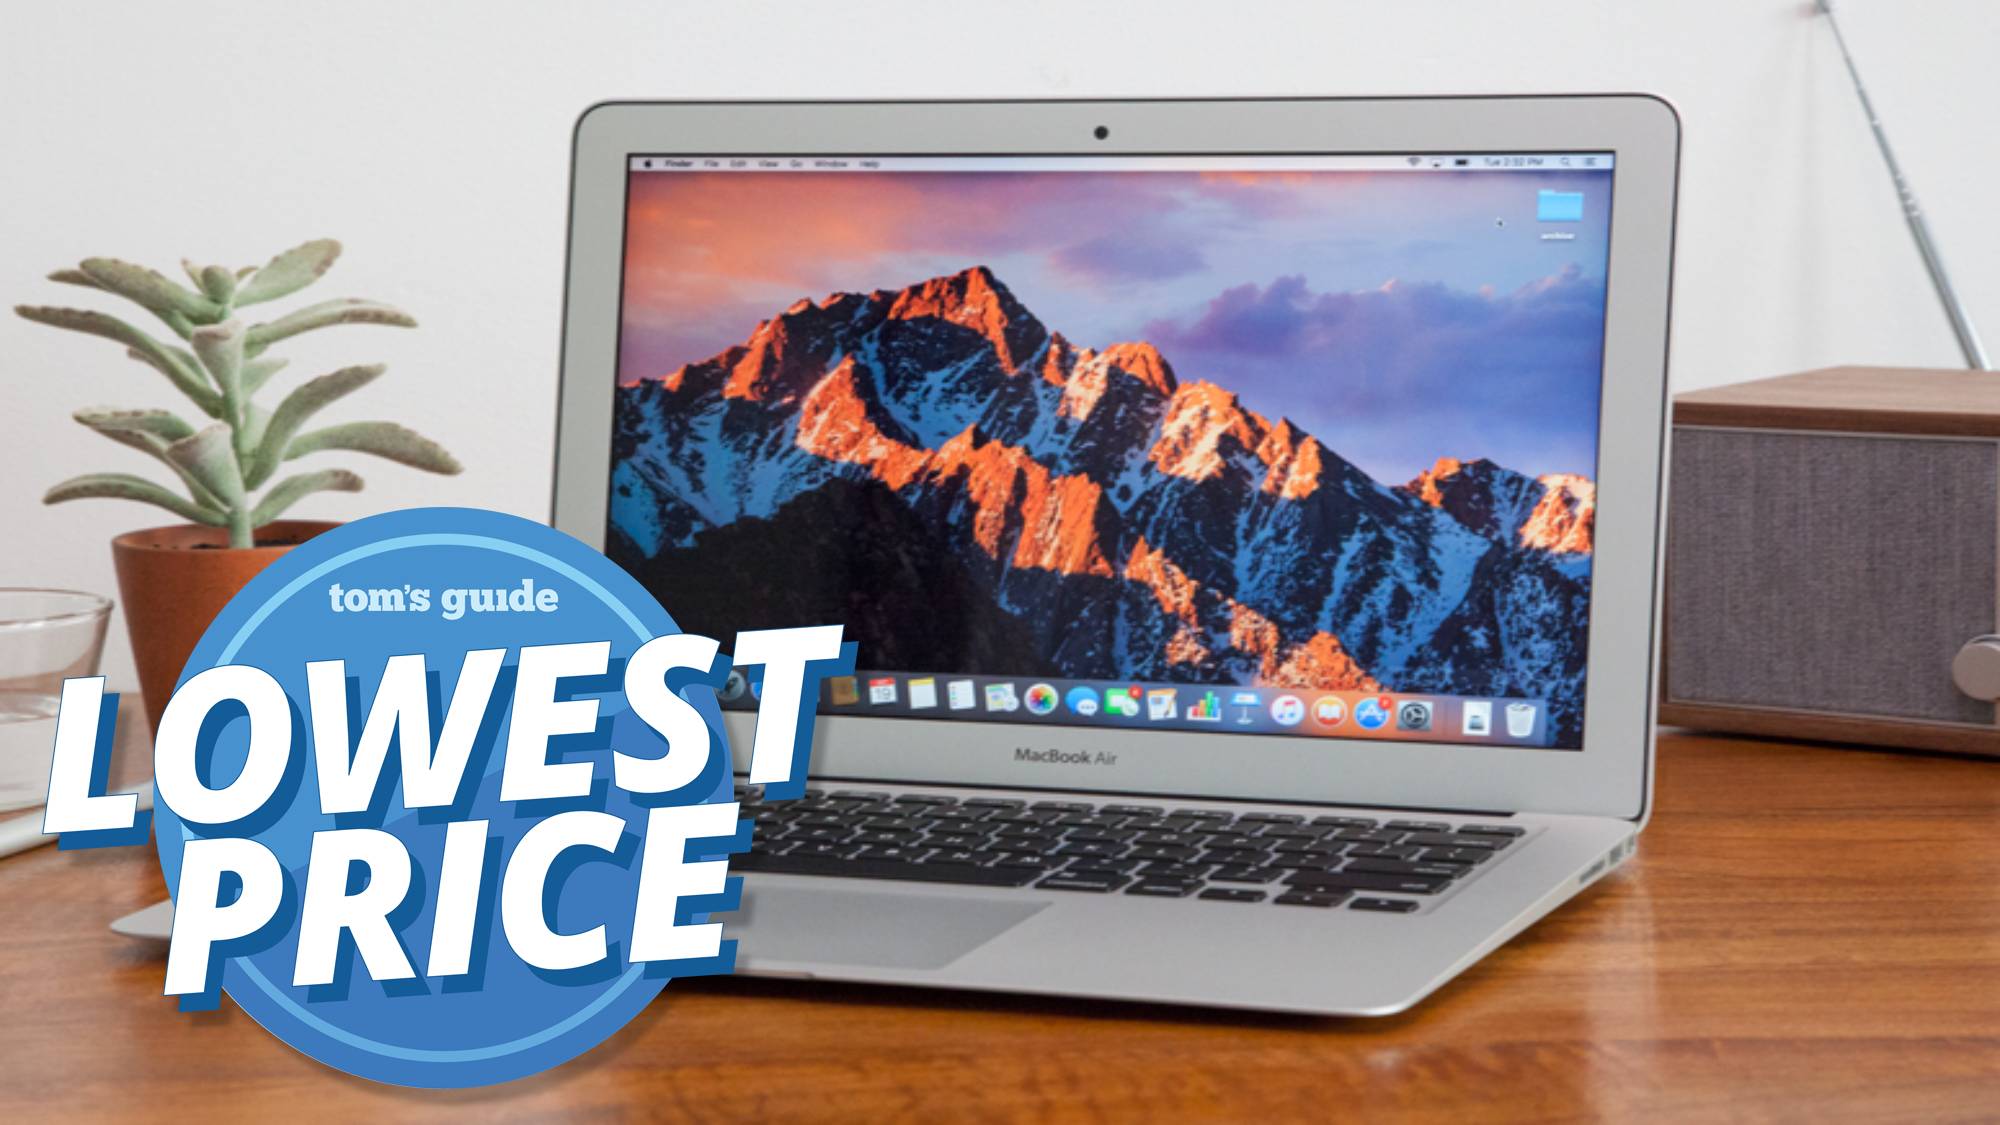 The MacBook Air at 699 is the Black Friday laptop deal of the year